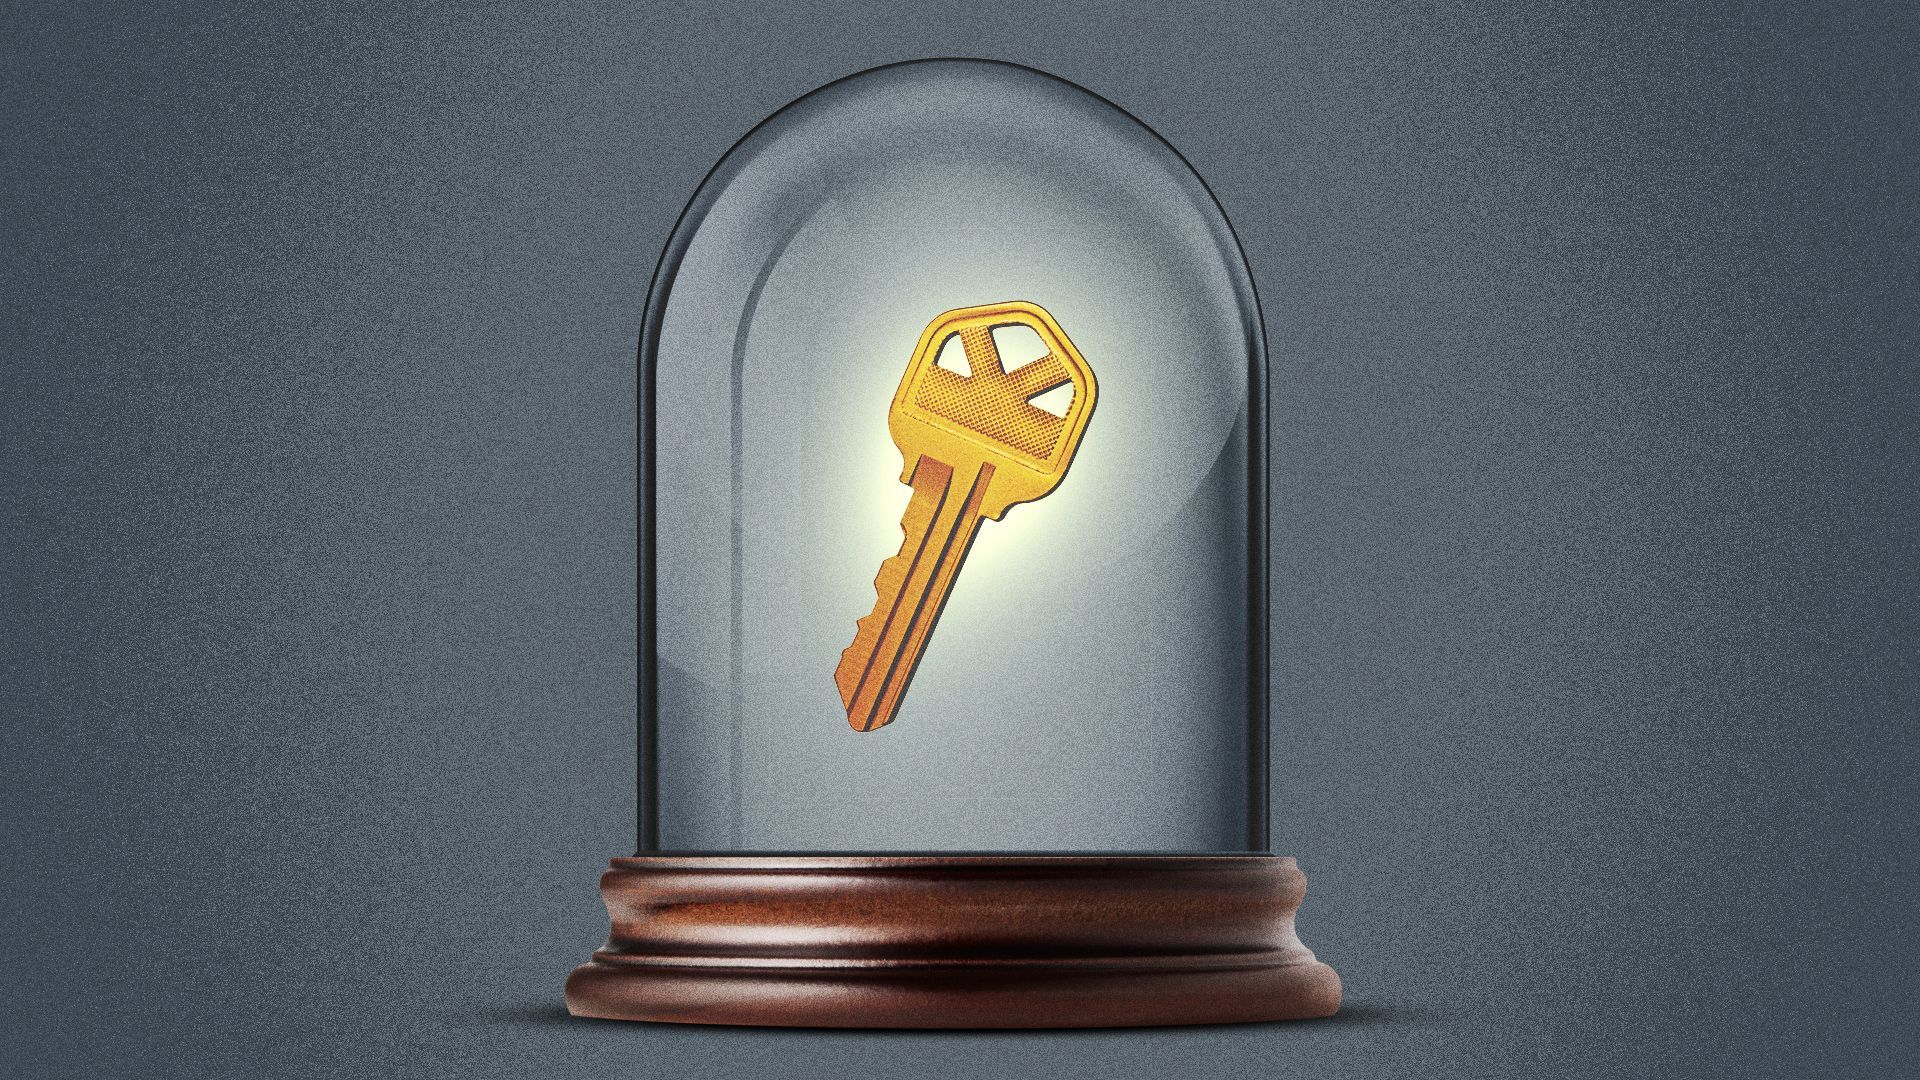 Illustration of a key floating in a glass dome. 